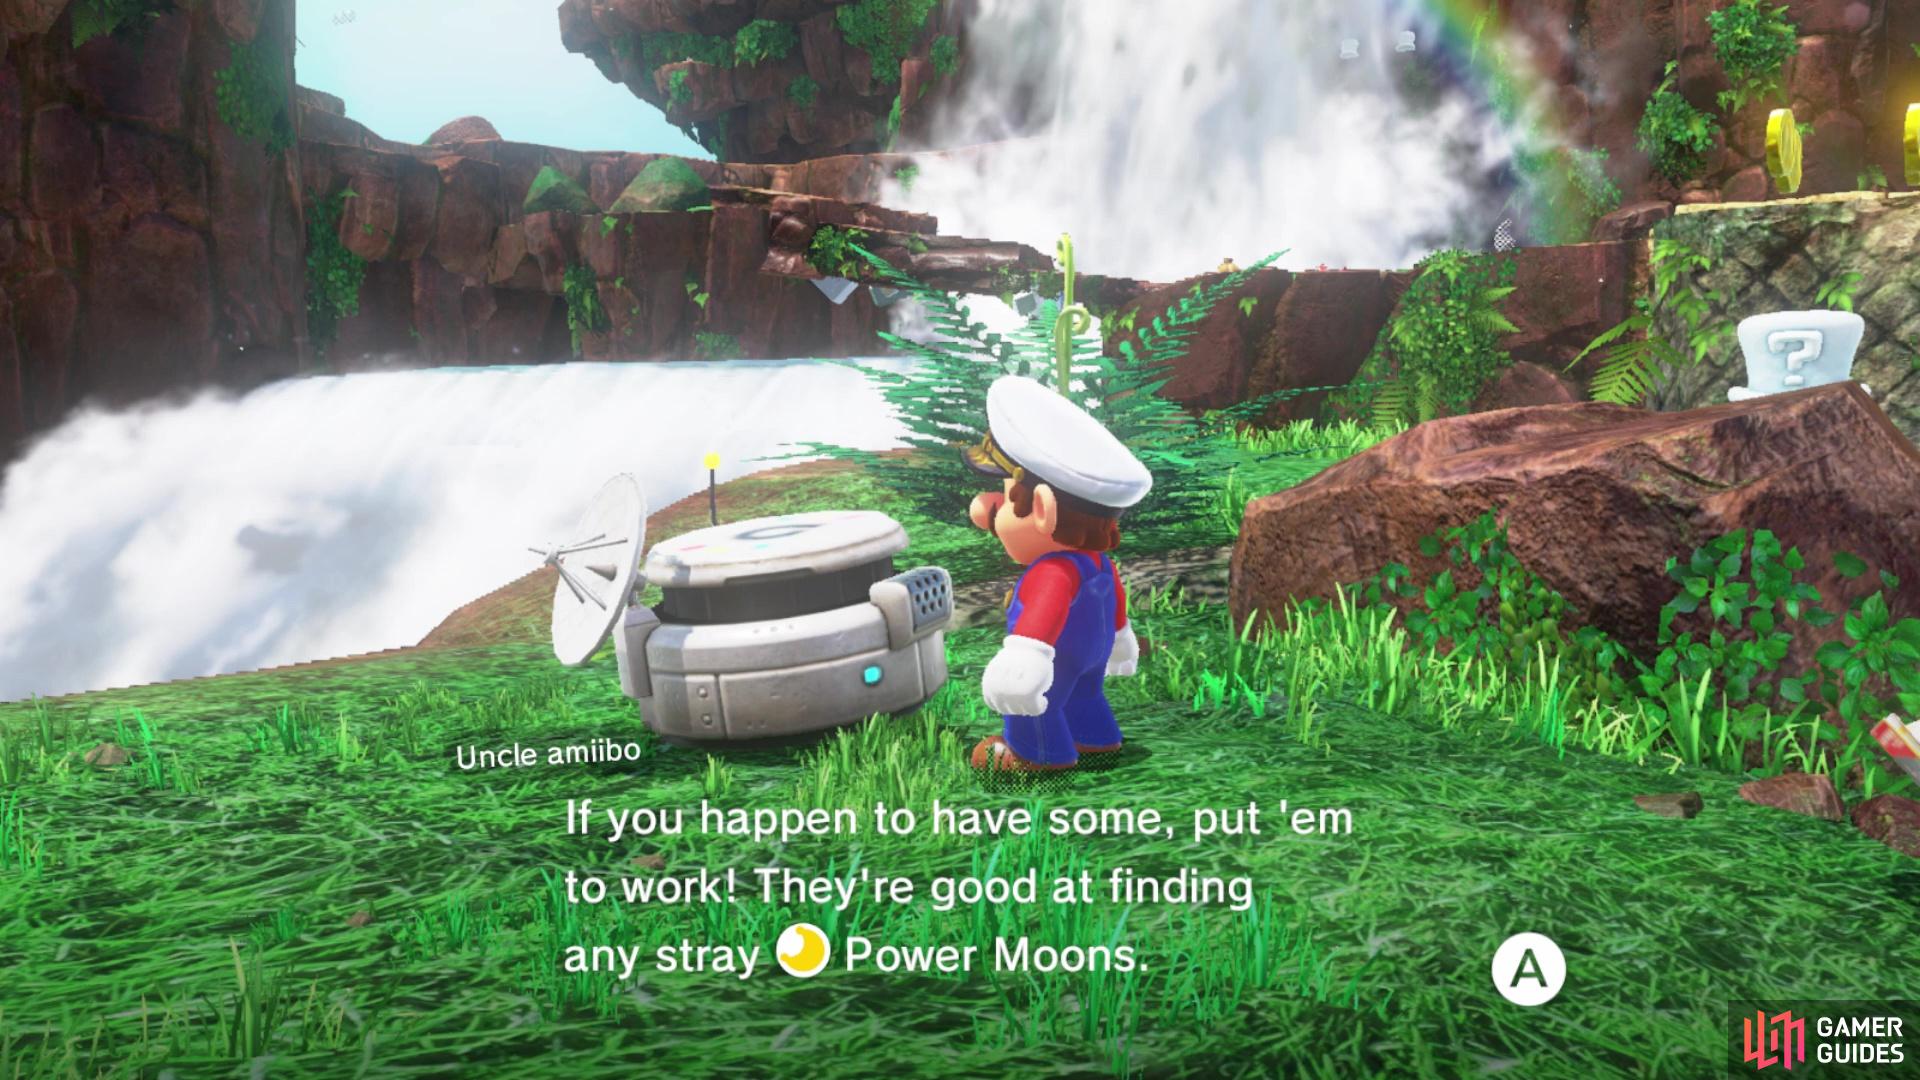 You can use Amiibo to help find the locations of moons